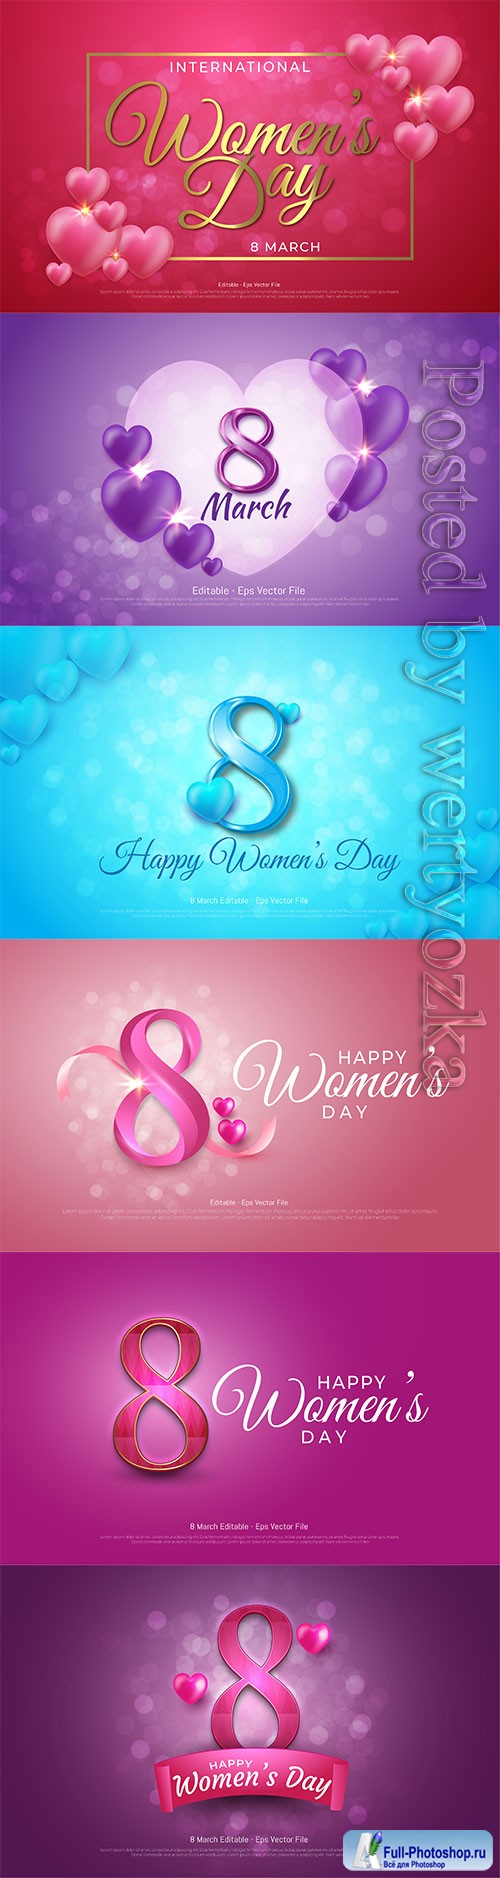 Vector editable text effect, women's day 8 march with flowers